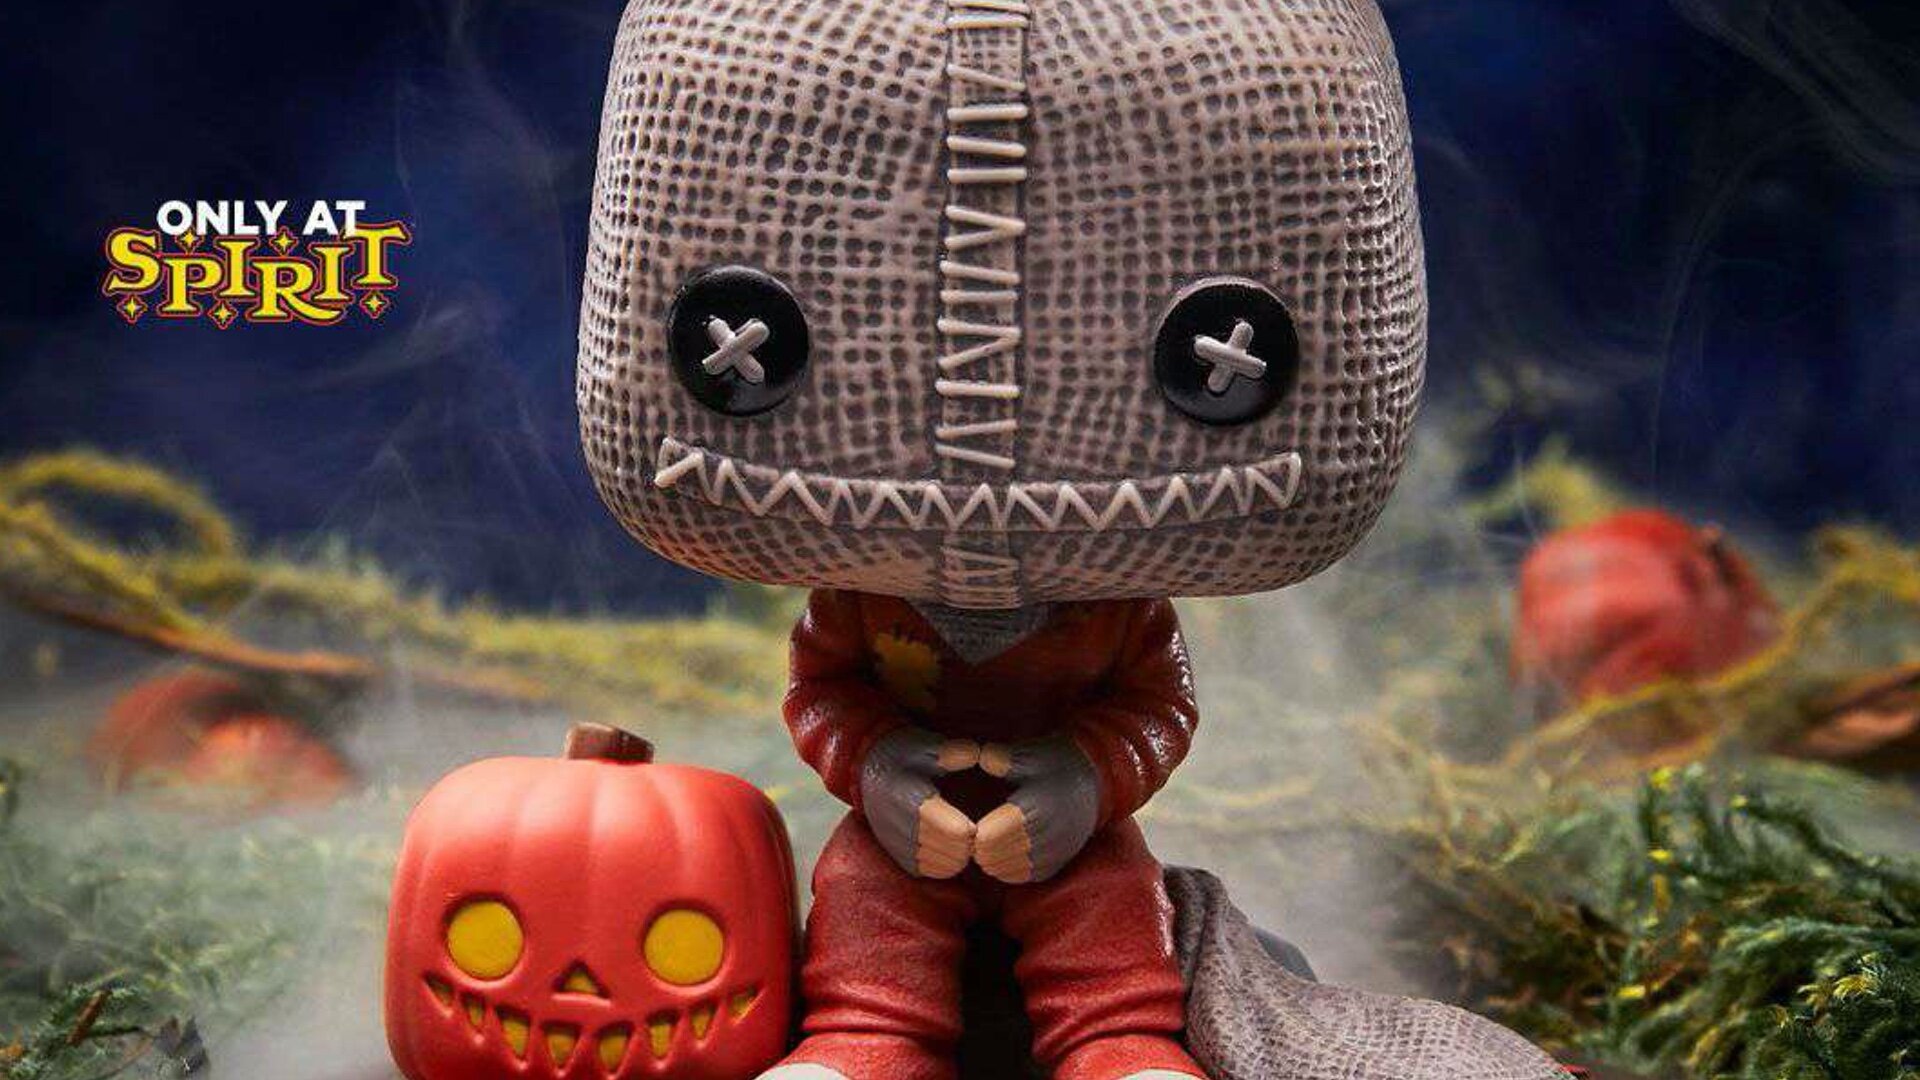 Trick r Treat Collectors Edition Bluray coming this Halloween